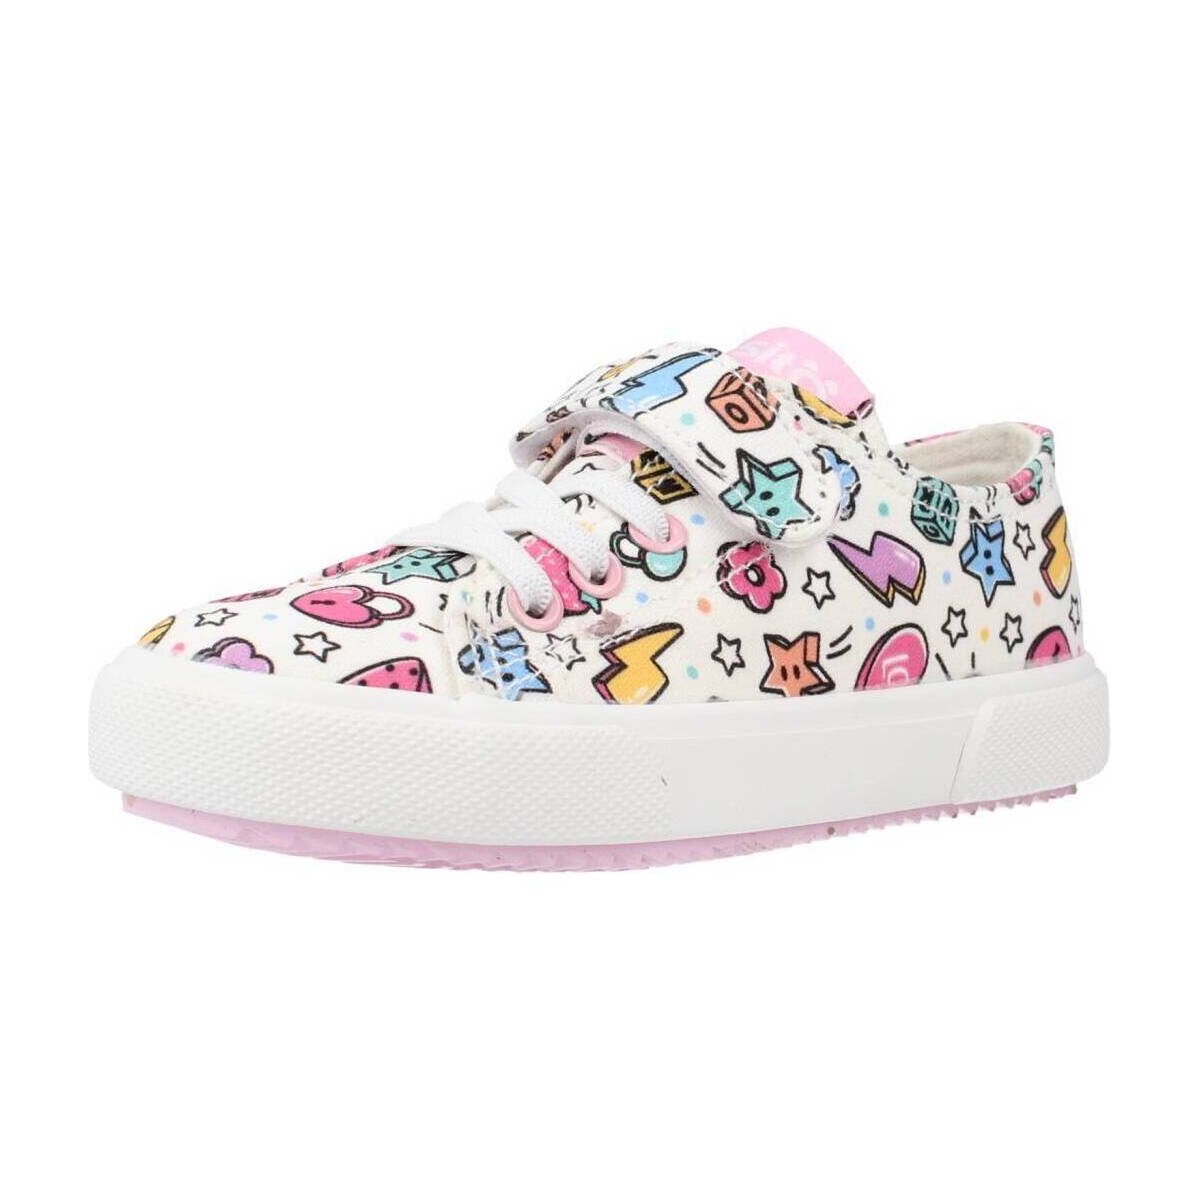 Chaussures Fille Baskets basses Osito NVS15403 Multicolore